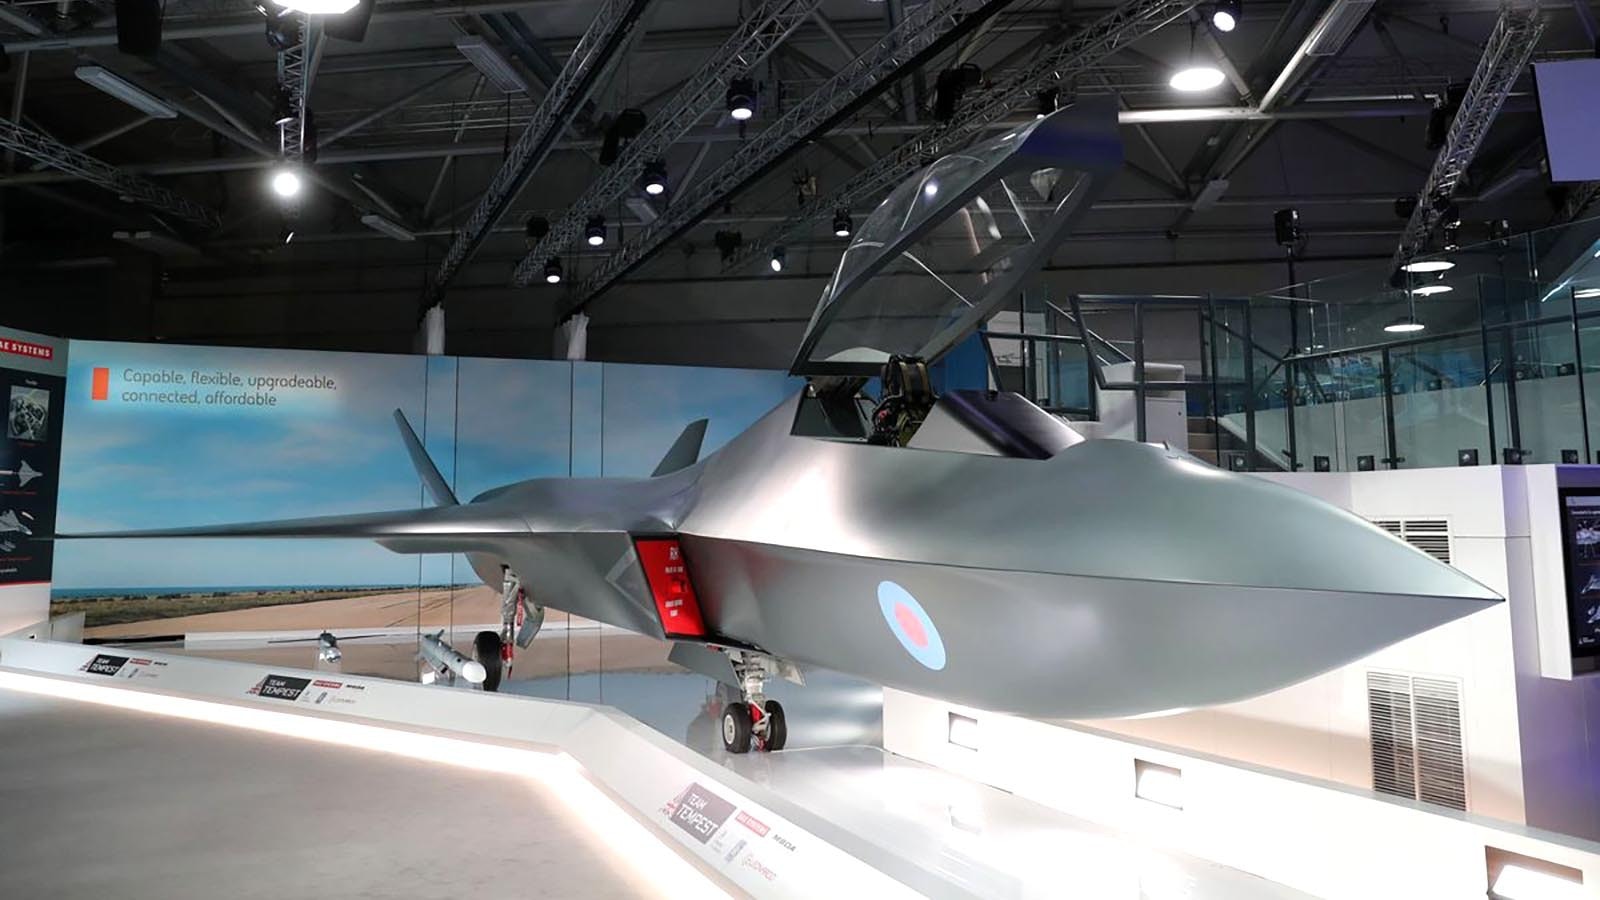 Electric fighter jets may be the next big thing for global military forces, like the new Tempest fighter jet that's scheduled to be in service in the UK by 2030.